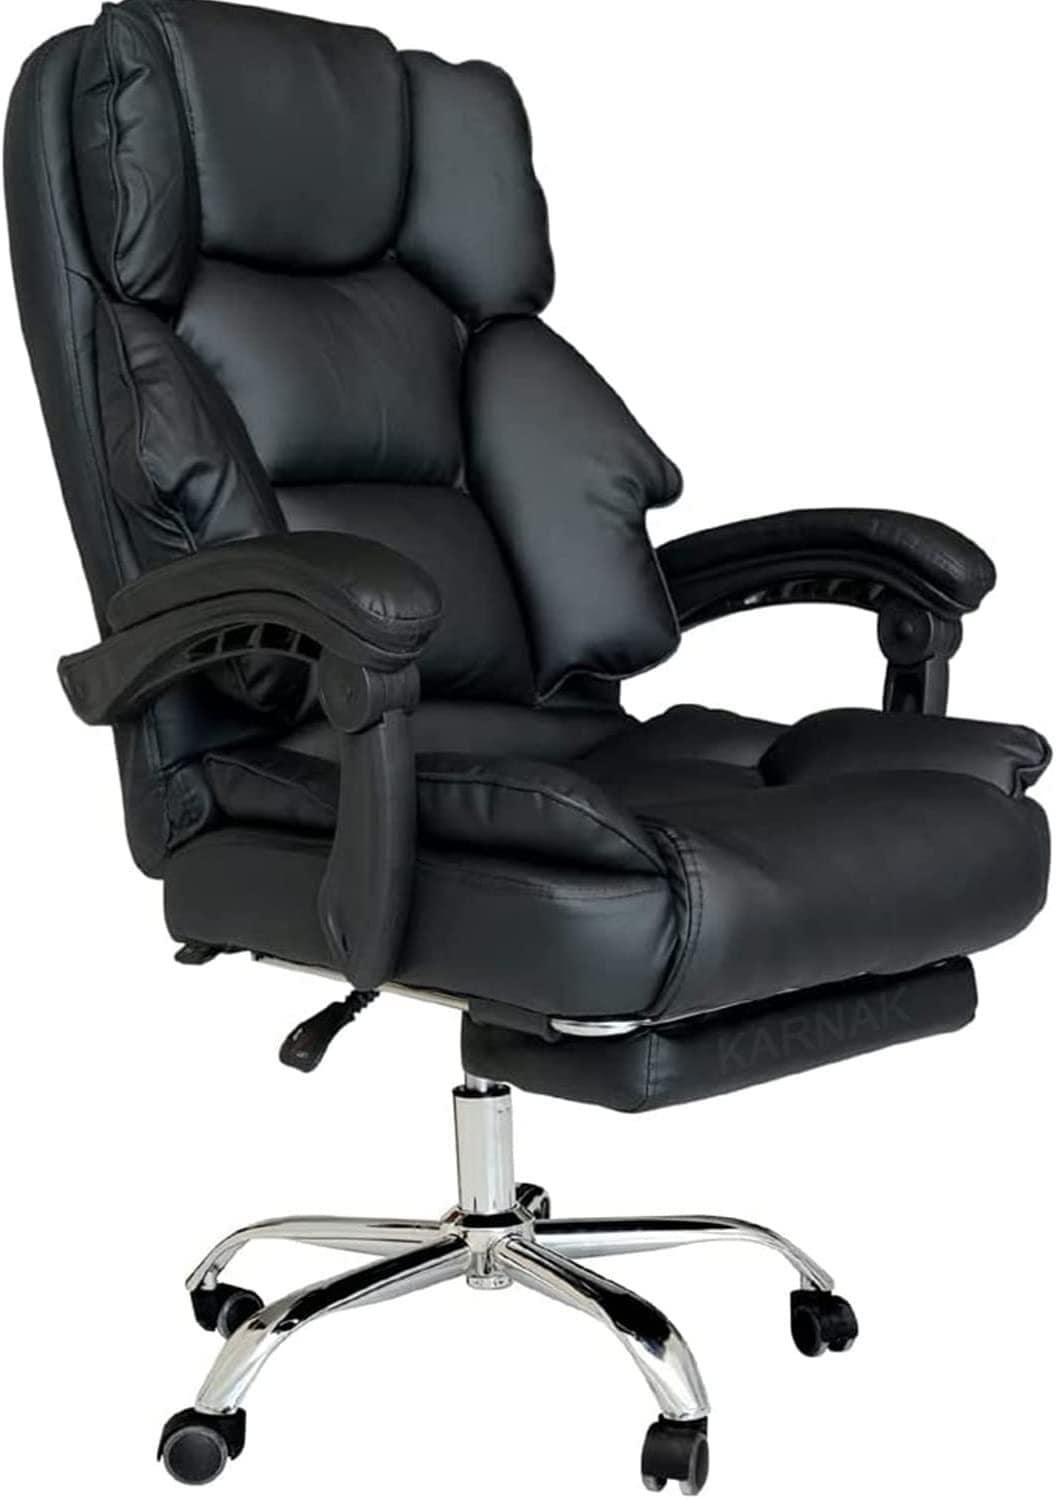 Karnak Executive Office Gaming Chair PU Leather 360 Swivel Desk Chair, High Back &amp; Adjustable Height Computer Table Chair, Soft Foam Gaming Study Chair Lumbar Support With Footrest (Black)